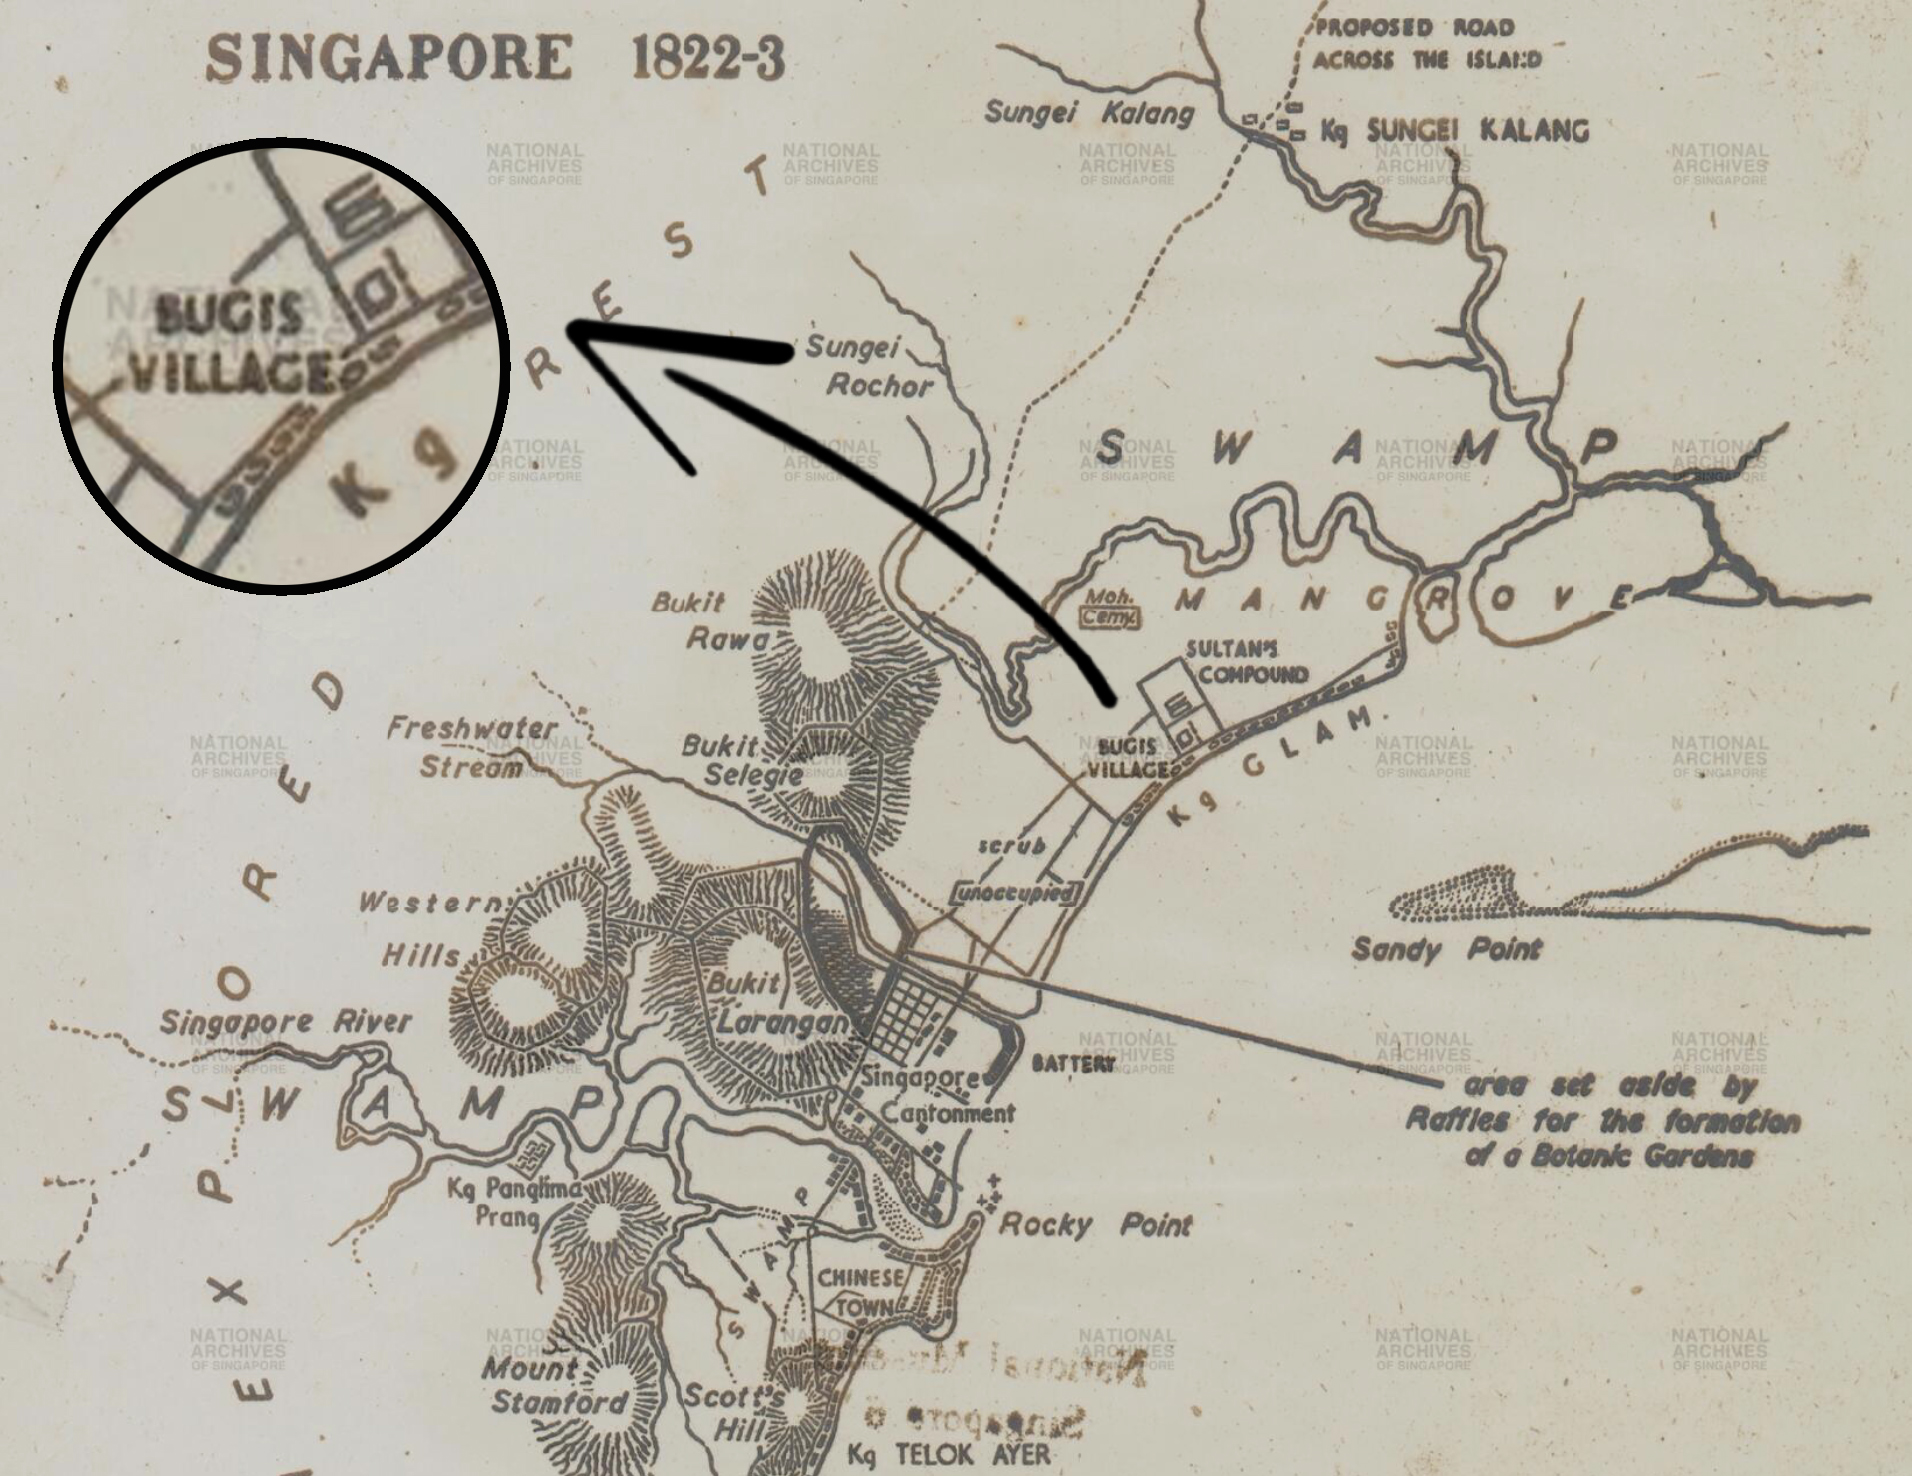 1822 map of Singapore Town. Adapted from National Archives. 